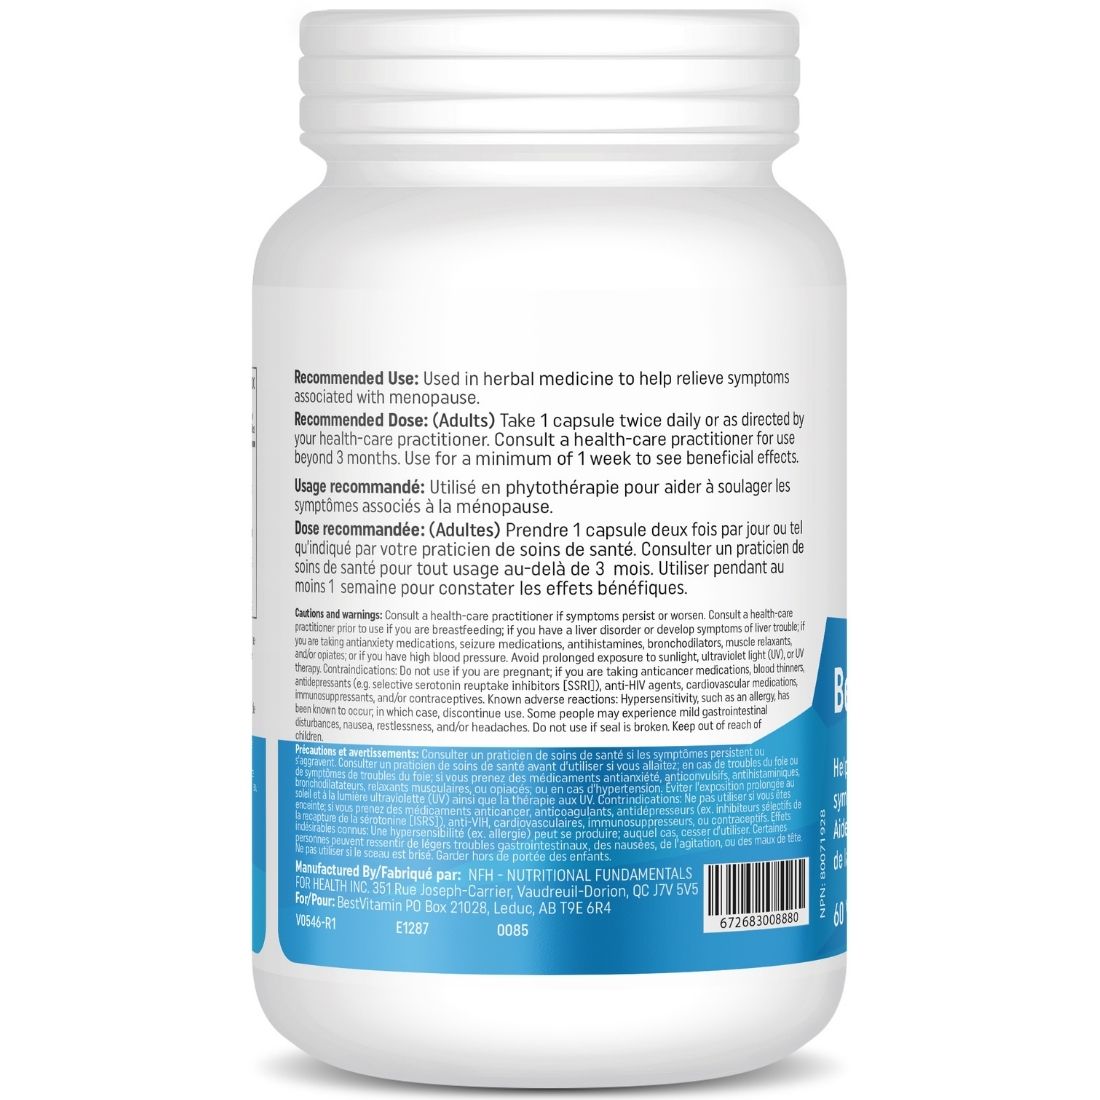 Bestvitamin Best Menopause Support, Helps reduce severity of hot flashes, improves sleep & mental wellbeing, 60 Capsules